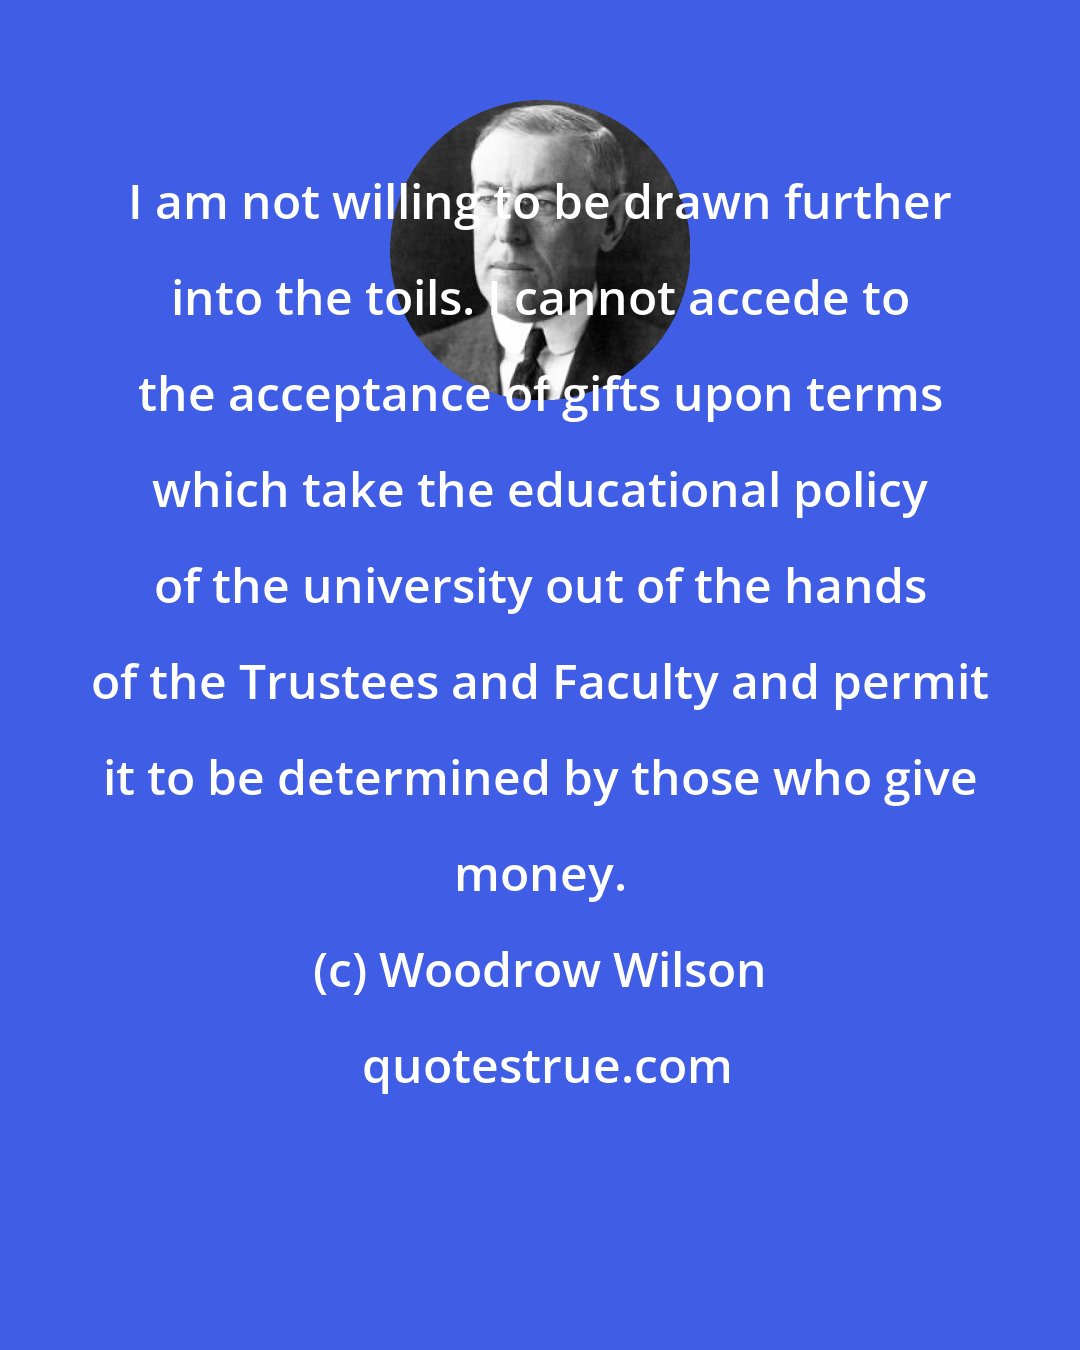 Woodrow Wilson: I am not willing to be drawn further into the toils. I cannot accede to the acceptance of gifts upon terms which take the educational policy of the university out of the hands of the Trustees and Faculty and permit it to be determined by those who give money.